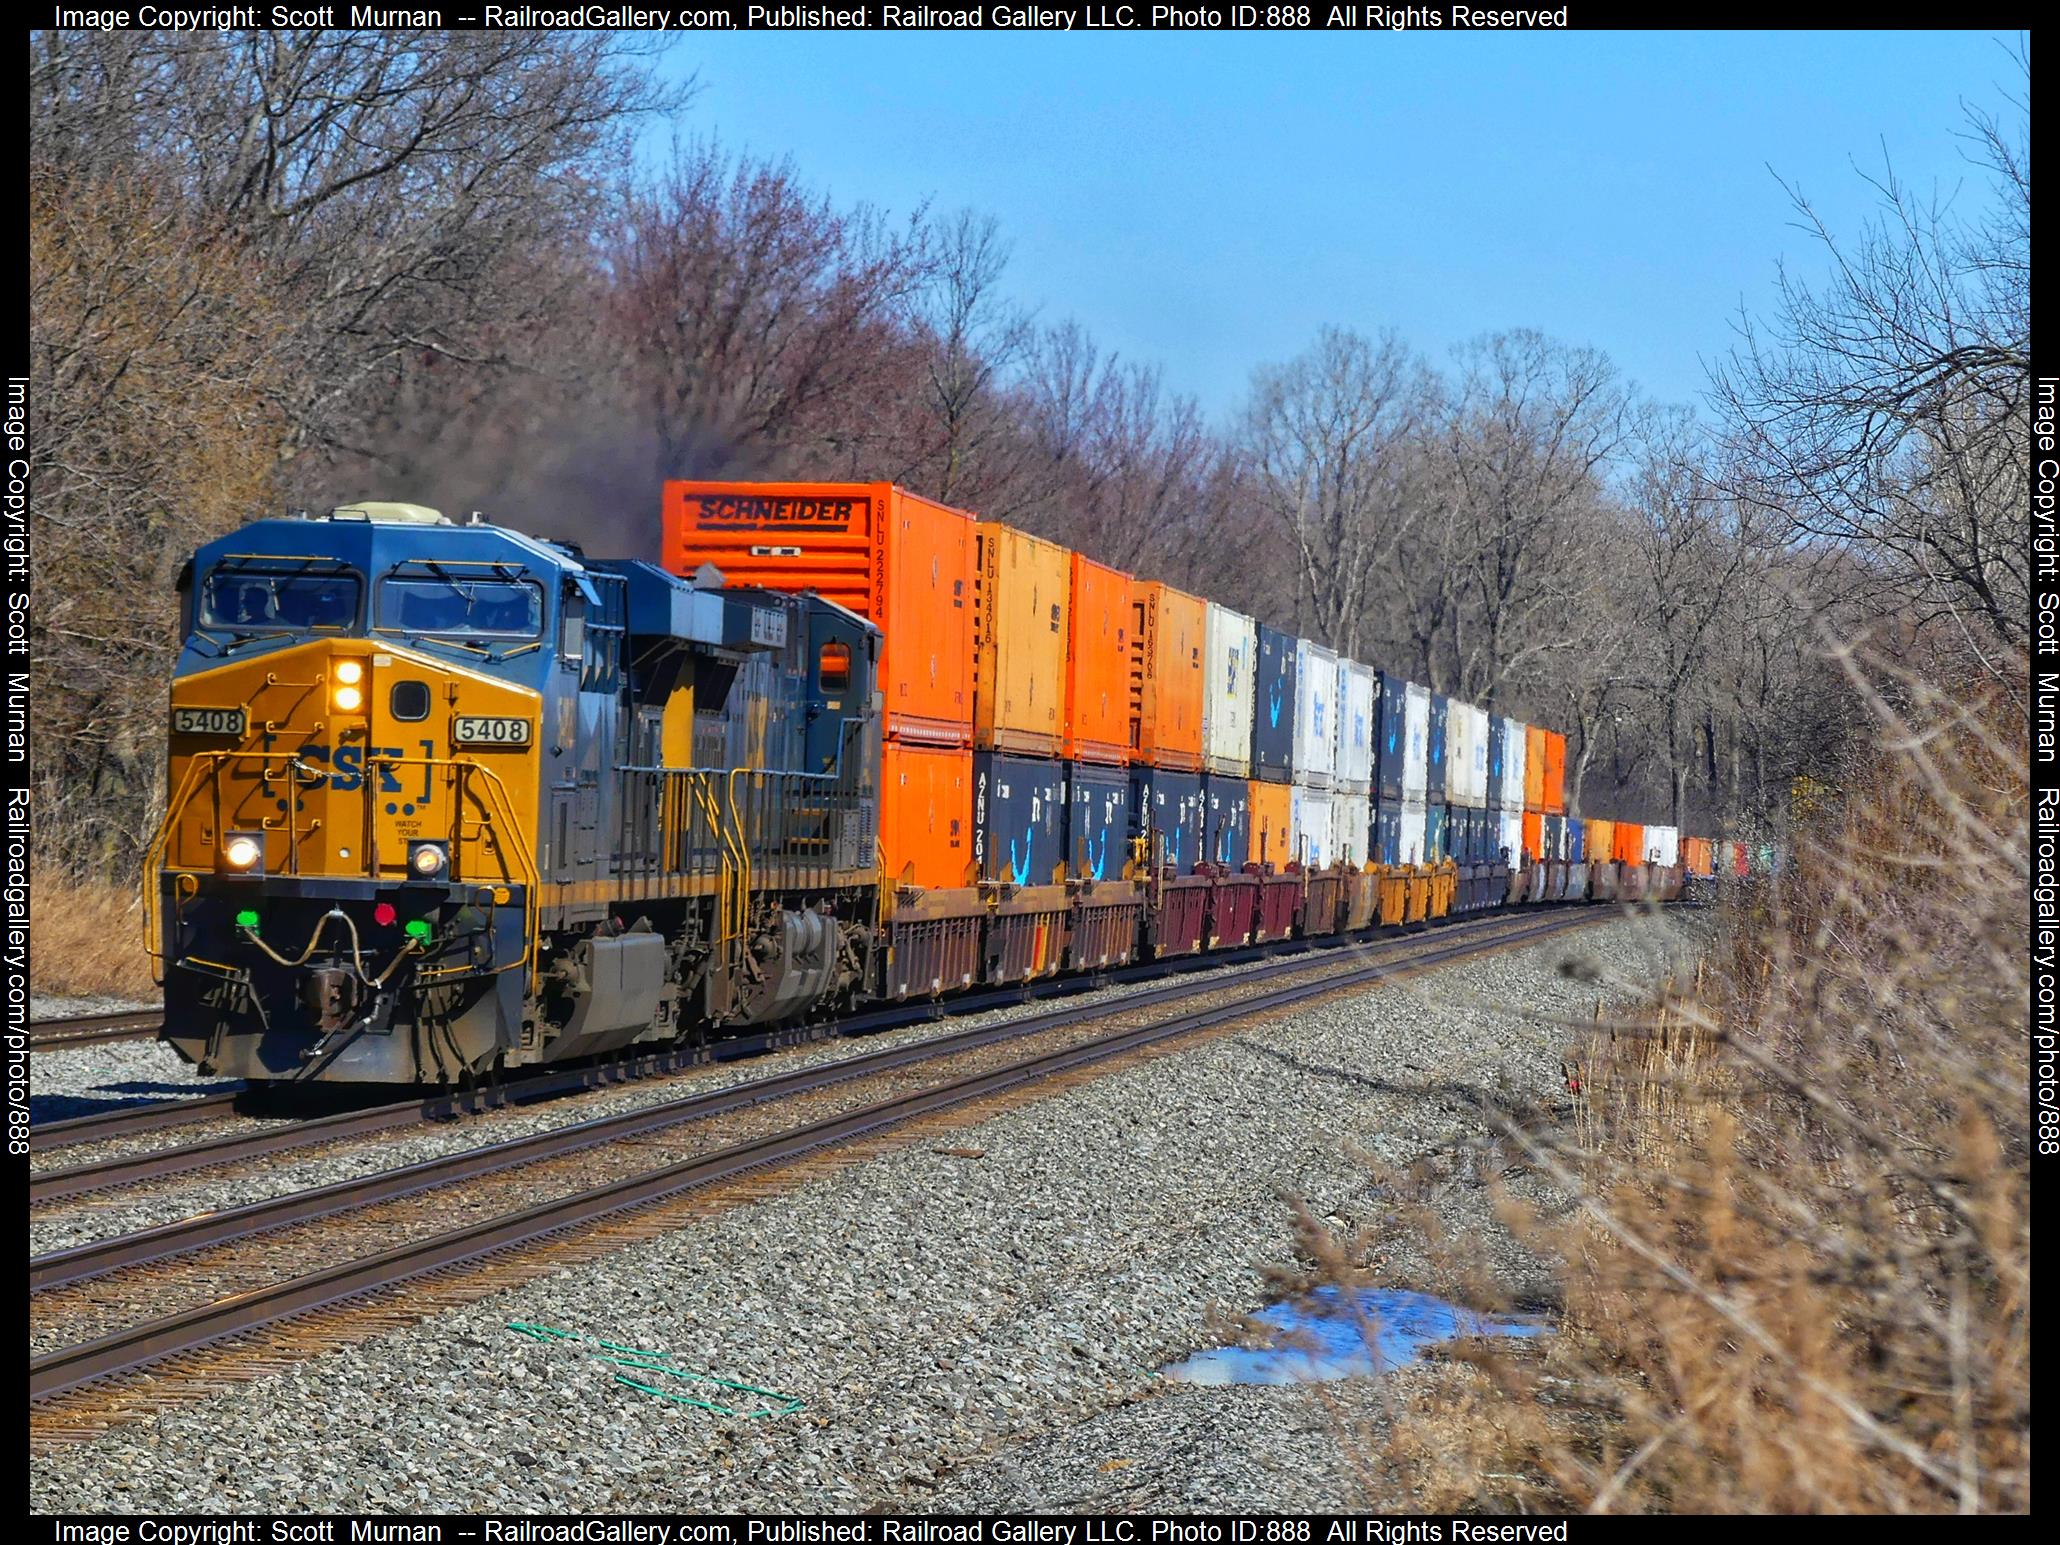 CSX 5408 is a class GE ES40DC and  is pictured in Batavia , New York, United States.  This was taken along the Buffalo Terminal Subdivision  on the CSX Transportation. Photo Copyright: Scott  Murnan  uploaded to Railroad Gallery on 03/27/2023. This photograph of CSX 5408 was taken on Sunday, March 26, 2023. All Rights Reserved. 